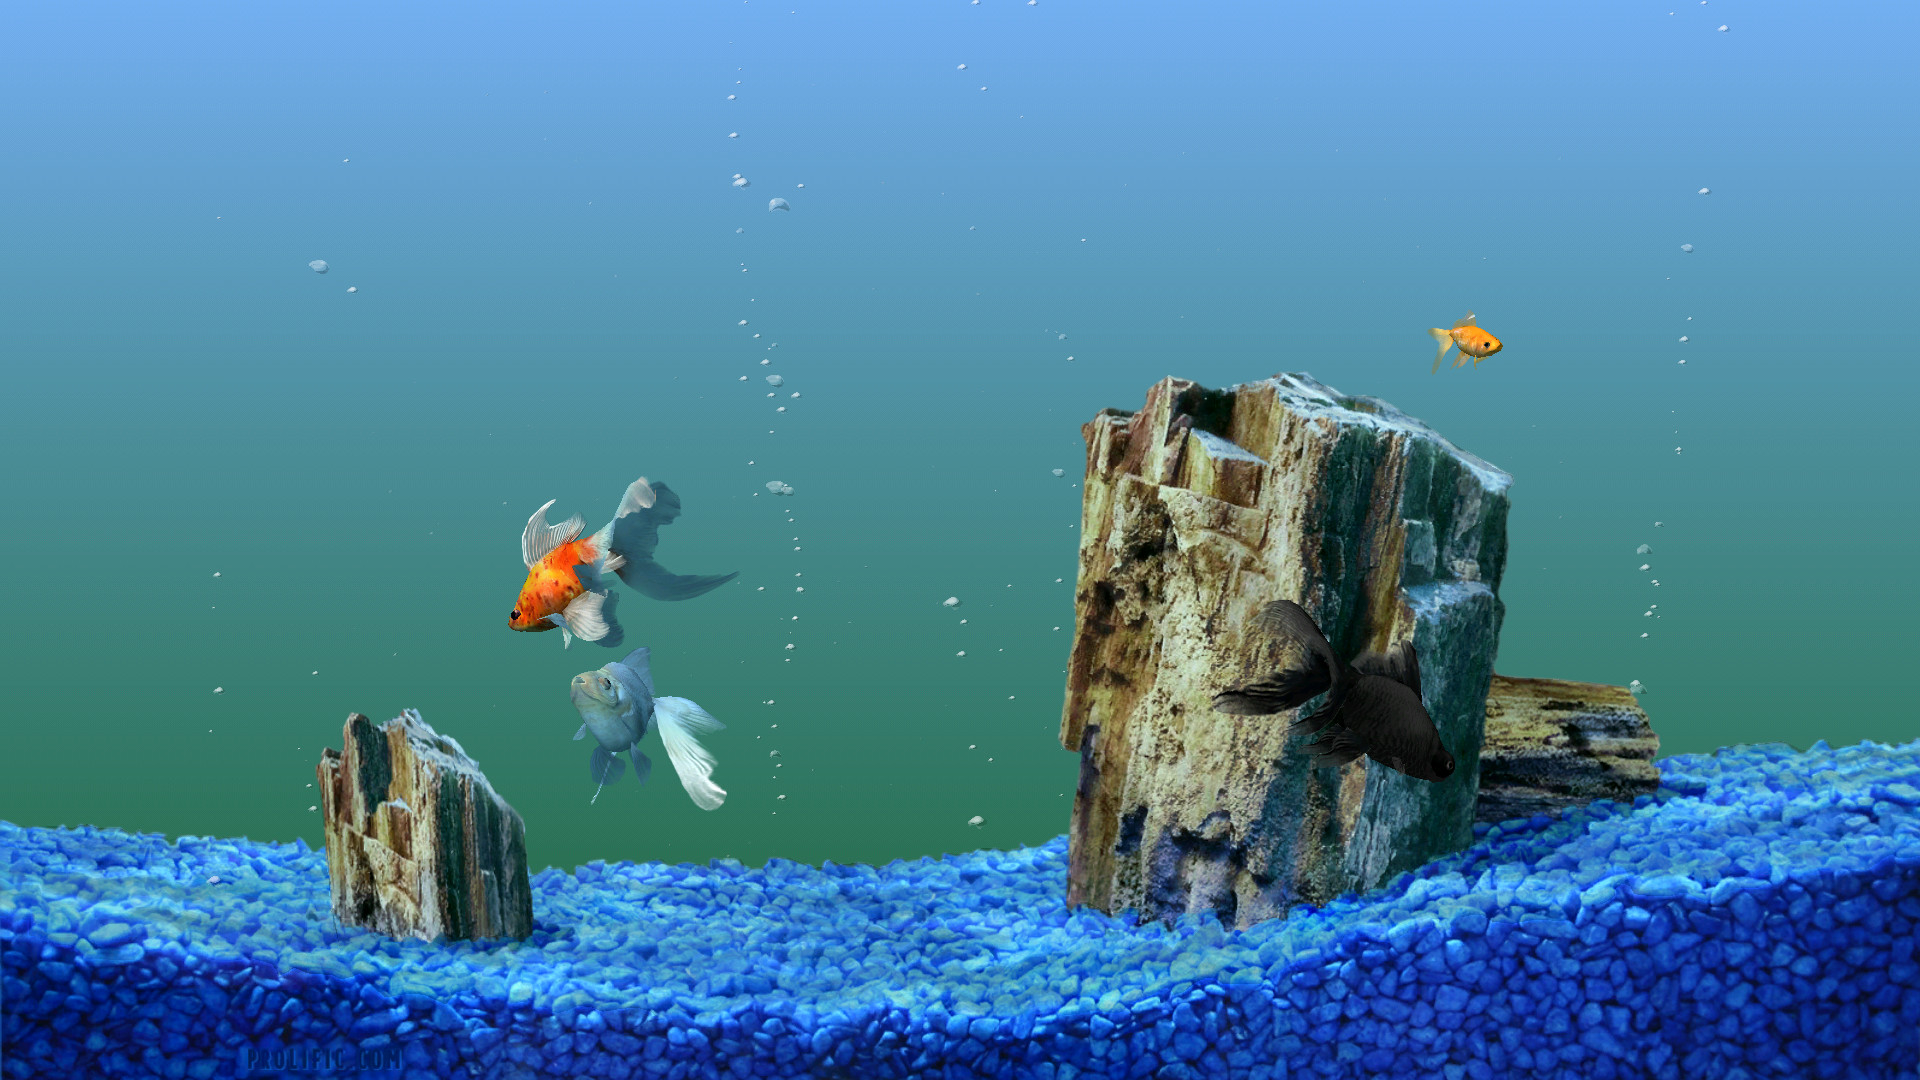 1920x1080 Which One To Choose: Animated Or Static Picture Fish Tank Background : Fish  Tank Wallpaper